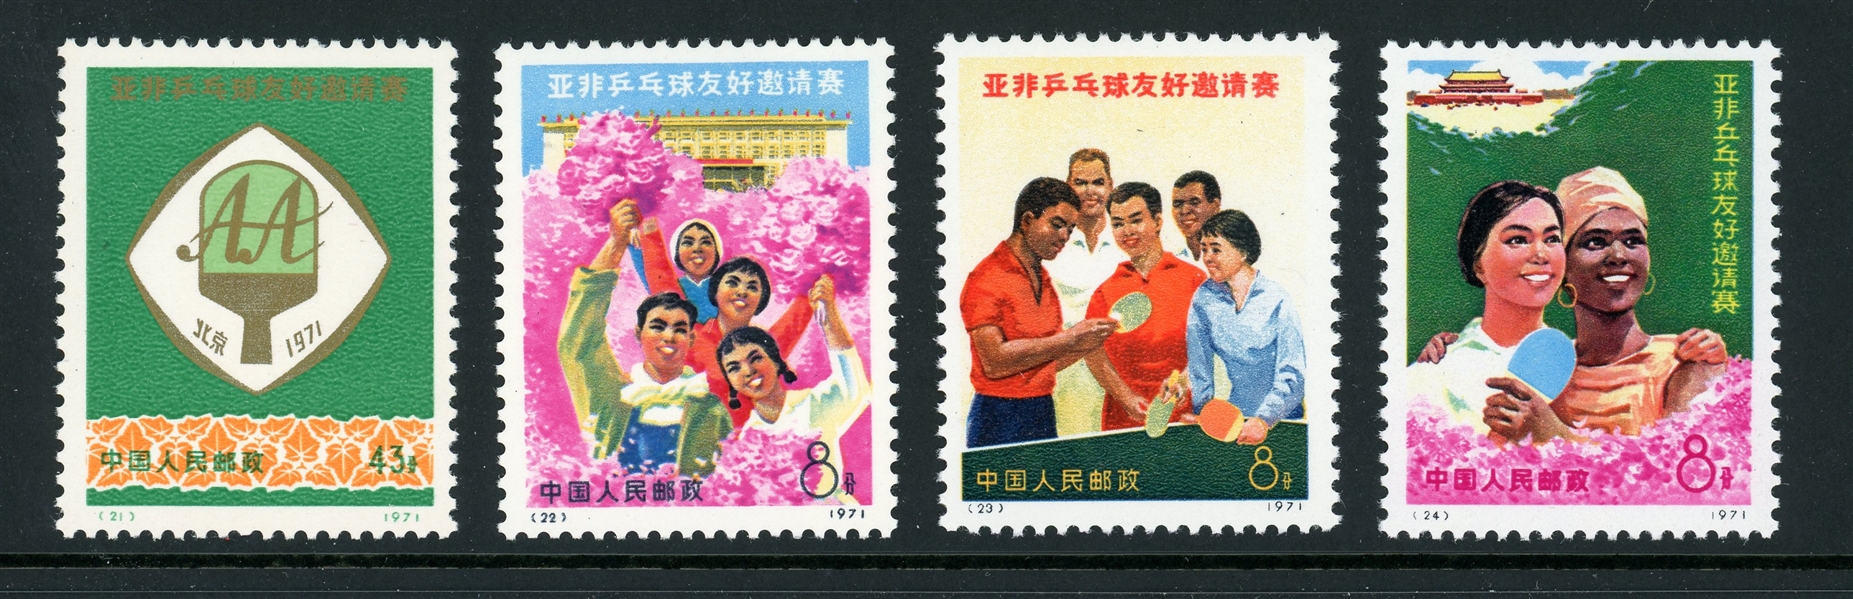 People's Republic of China Scott 1076-1079 MH F-VF Complete Set - Table Tennis 1971 (SCV $133.50)